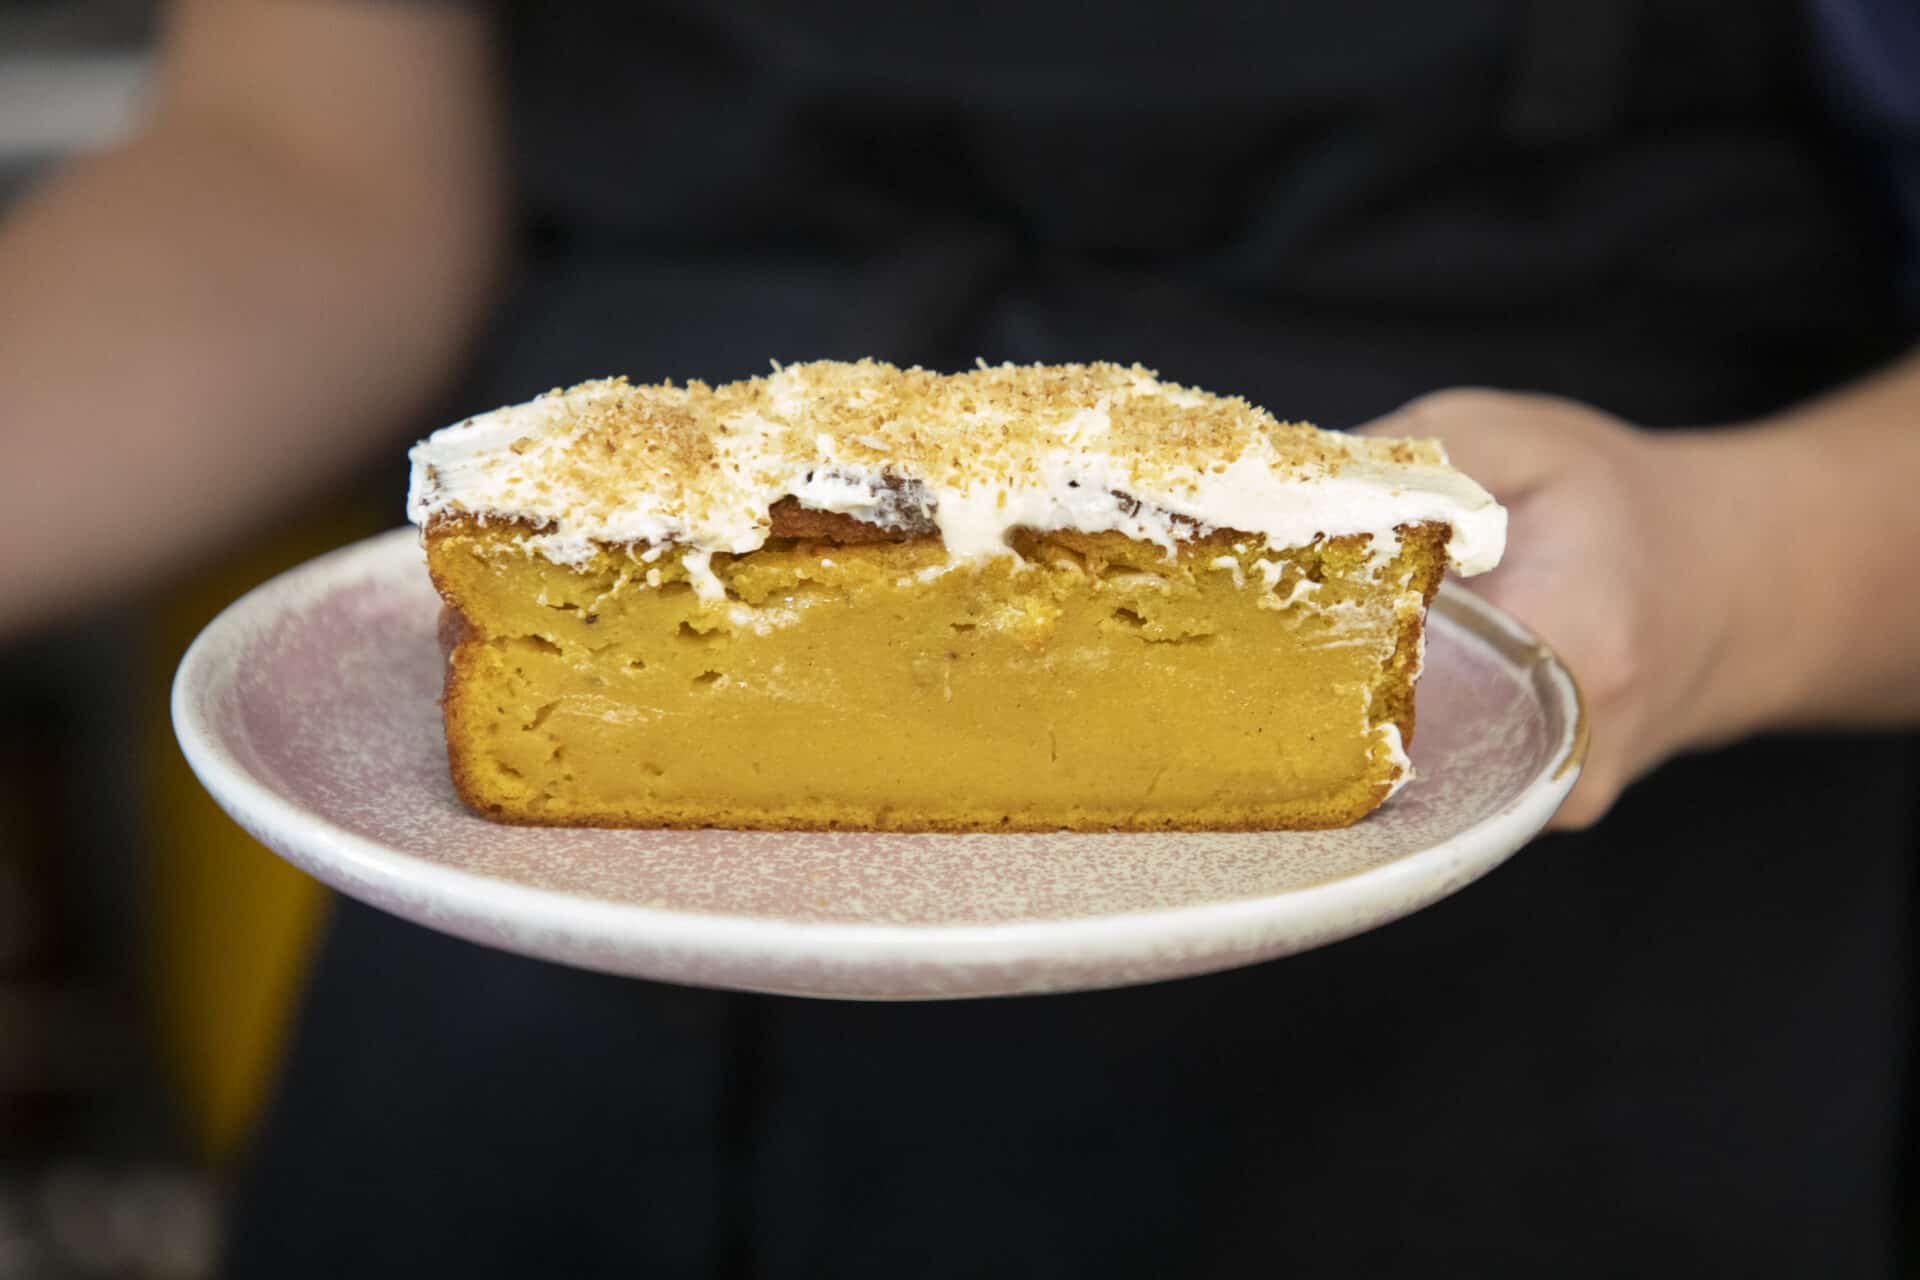 A piece of pumpkin cake with white icing and toasted coconut on top.